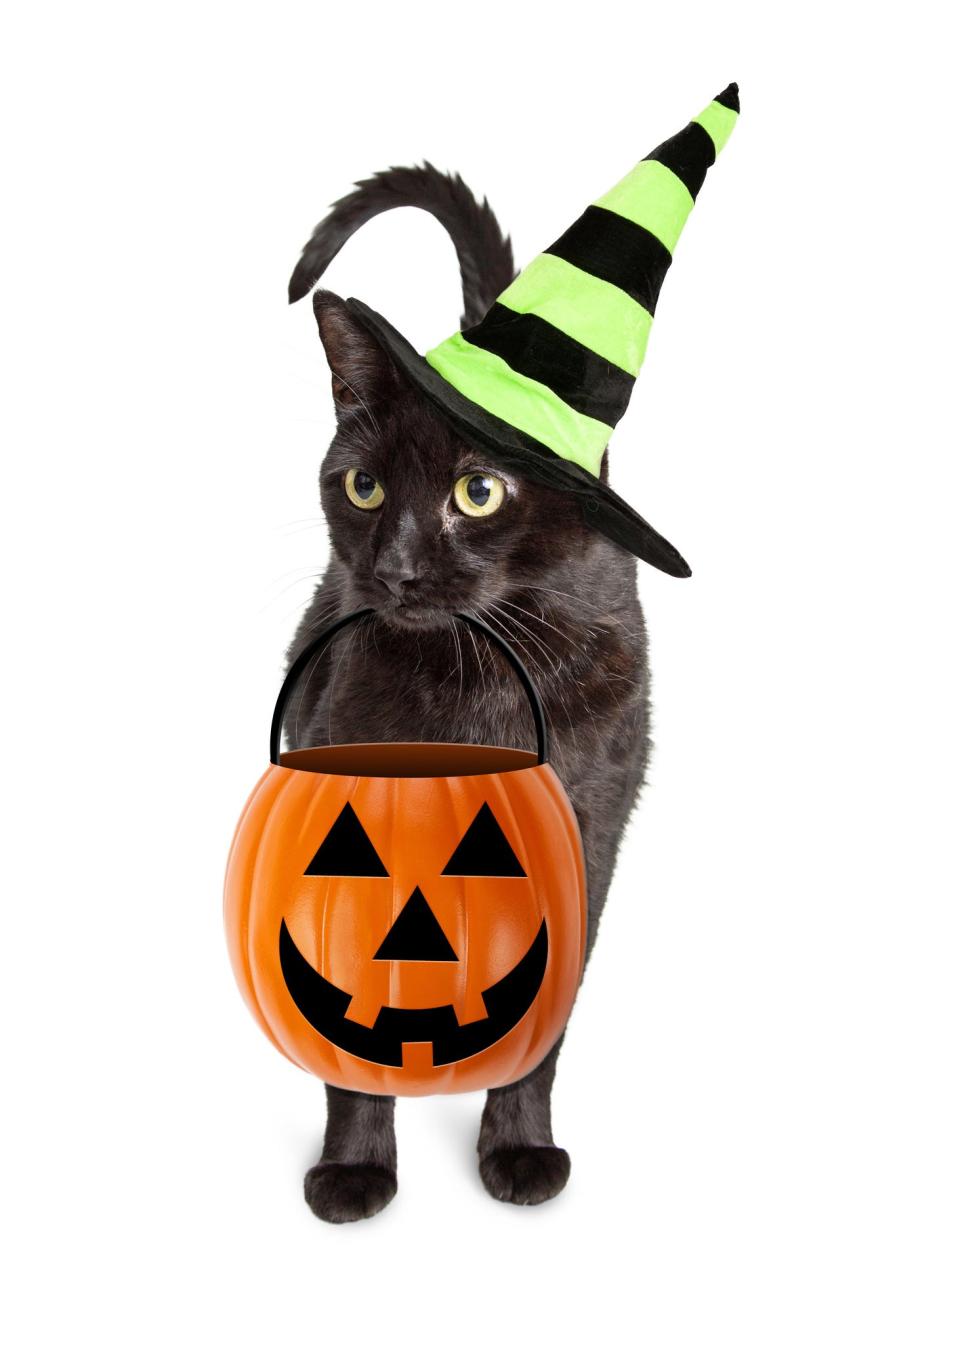 While black cats luckily aren't in huge danger Halloween night, young kids can still accidentally cause harm.